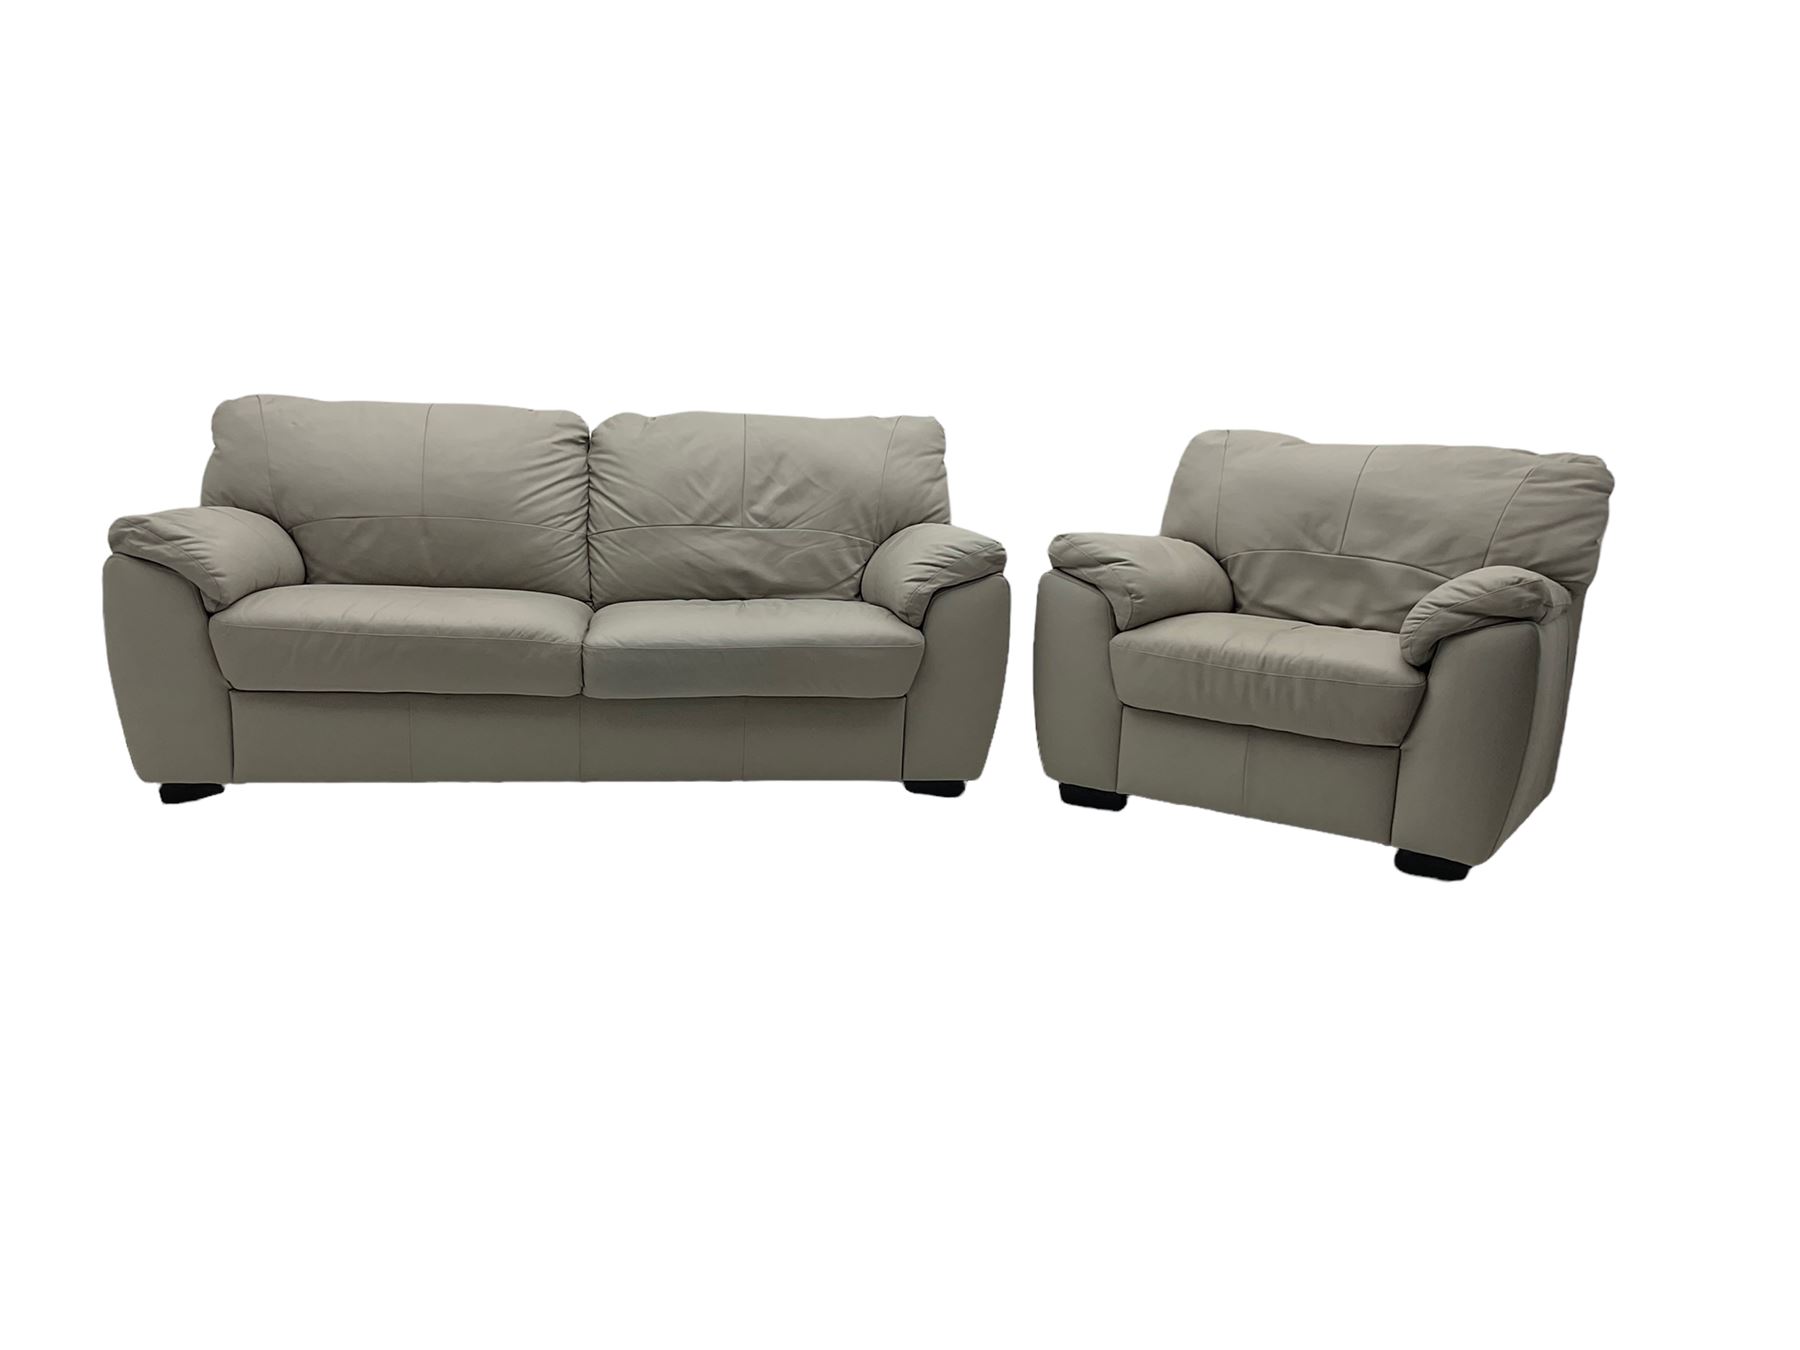 Two seat sofa (W185cm) - Image 2 of 8